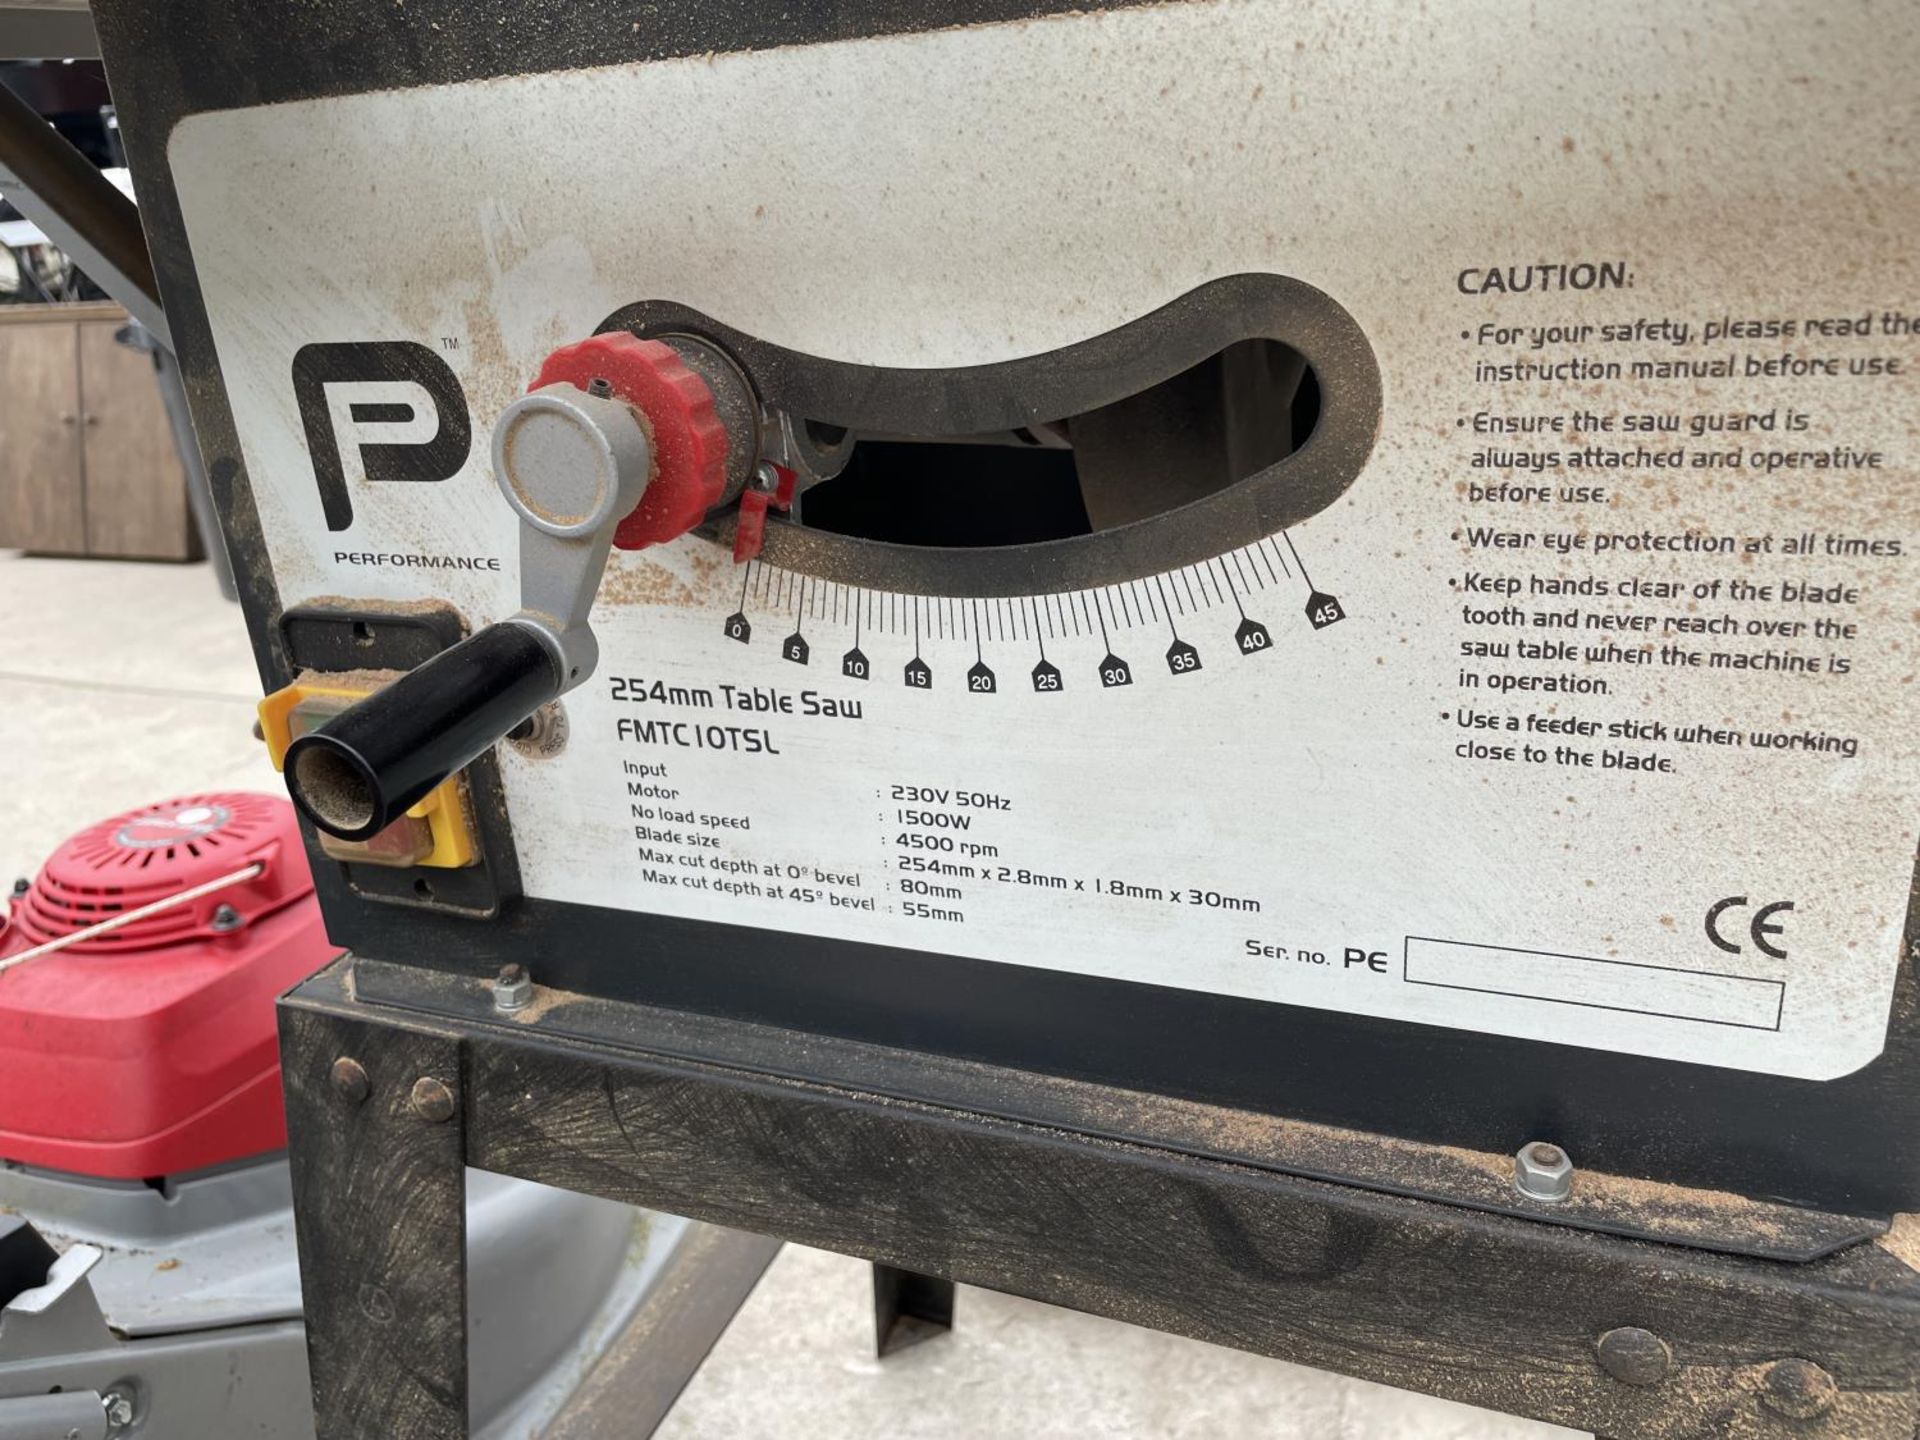 A PERFORMANCE 254MM TABLE SAW BELIEVED IN WORKING ORDER BUT NO WARRANTY - Image 5 of 6